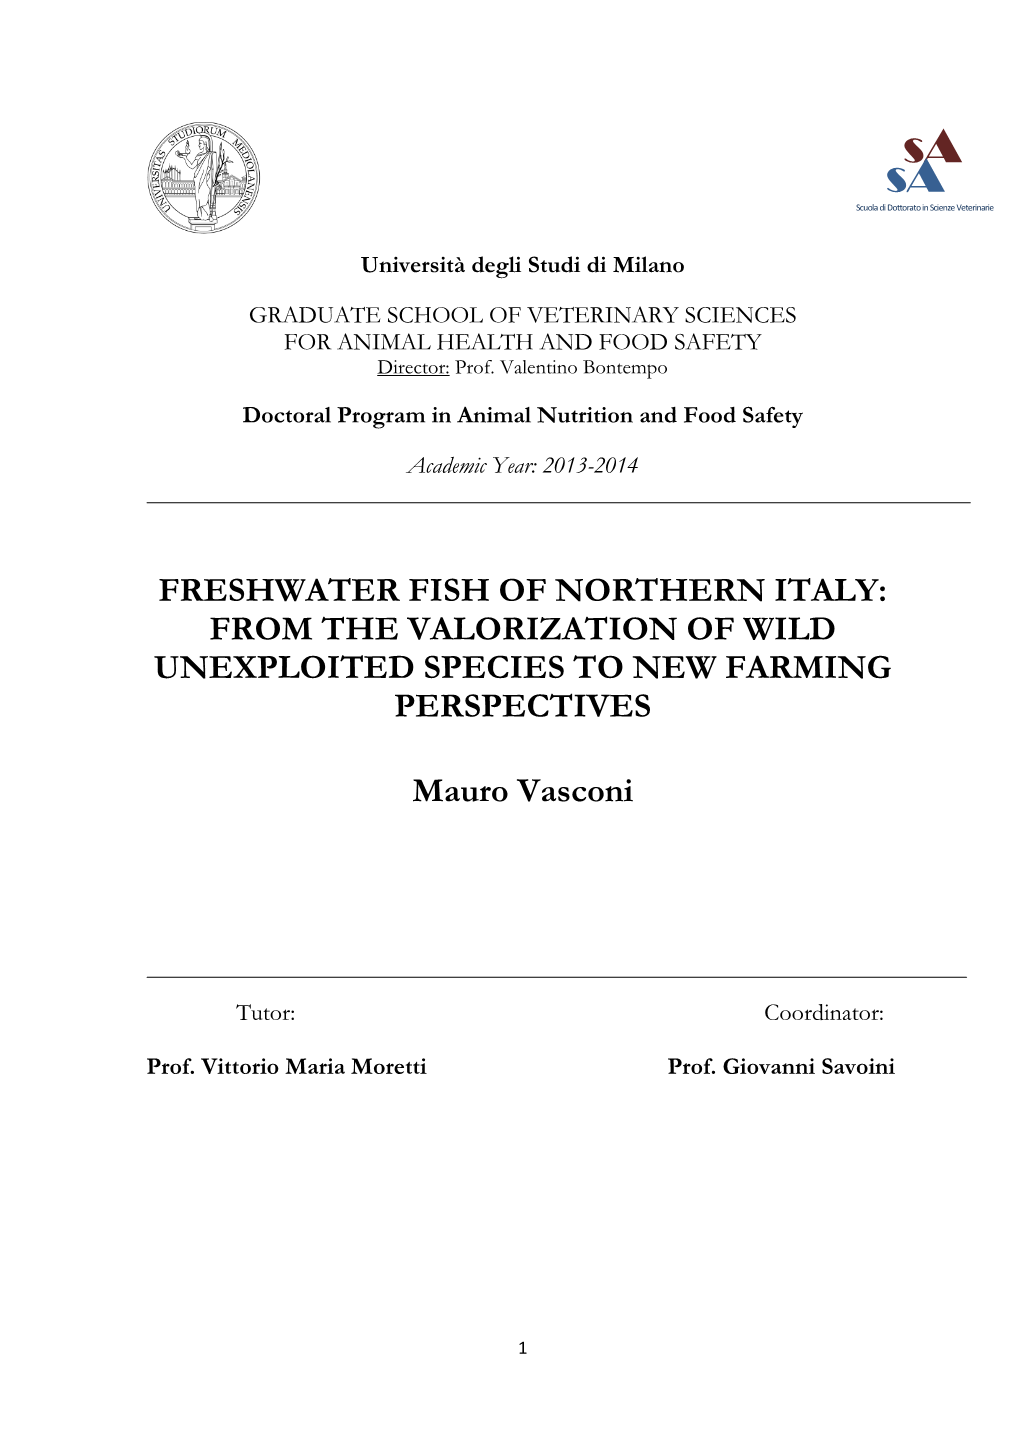 Freshwater Fish of Northern Italy: from the Valorization of Wild Unexploited Species to New Farming Perspectives